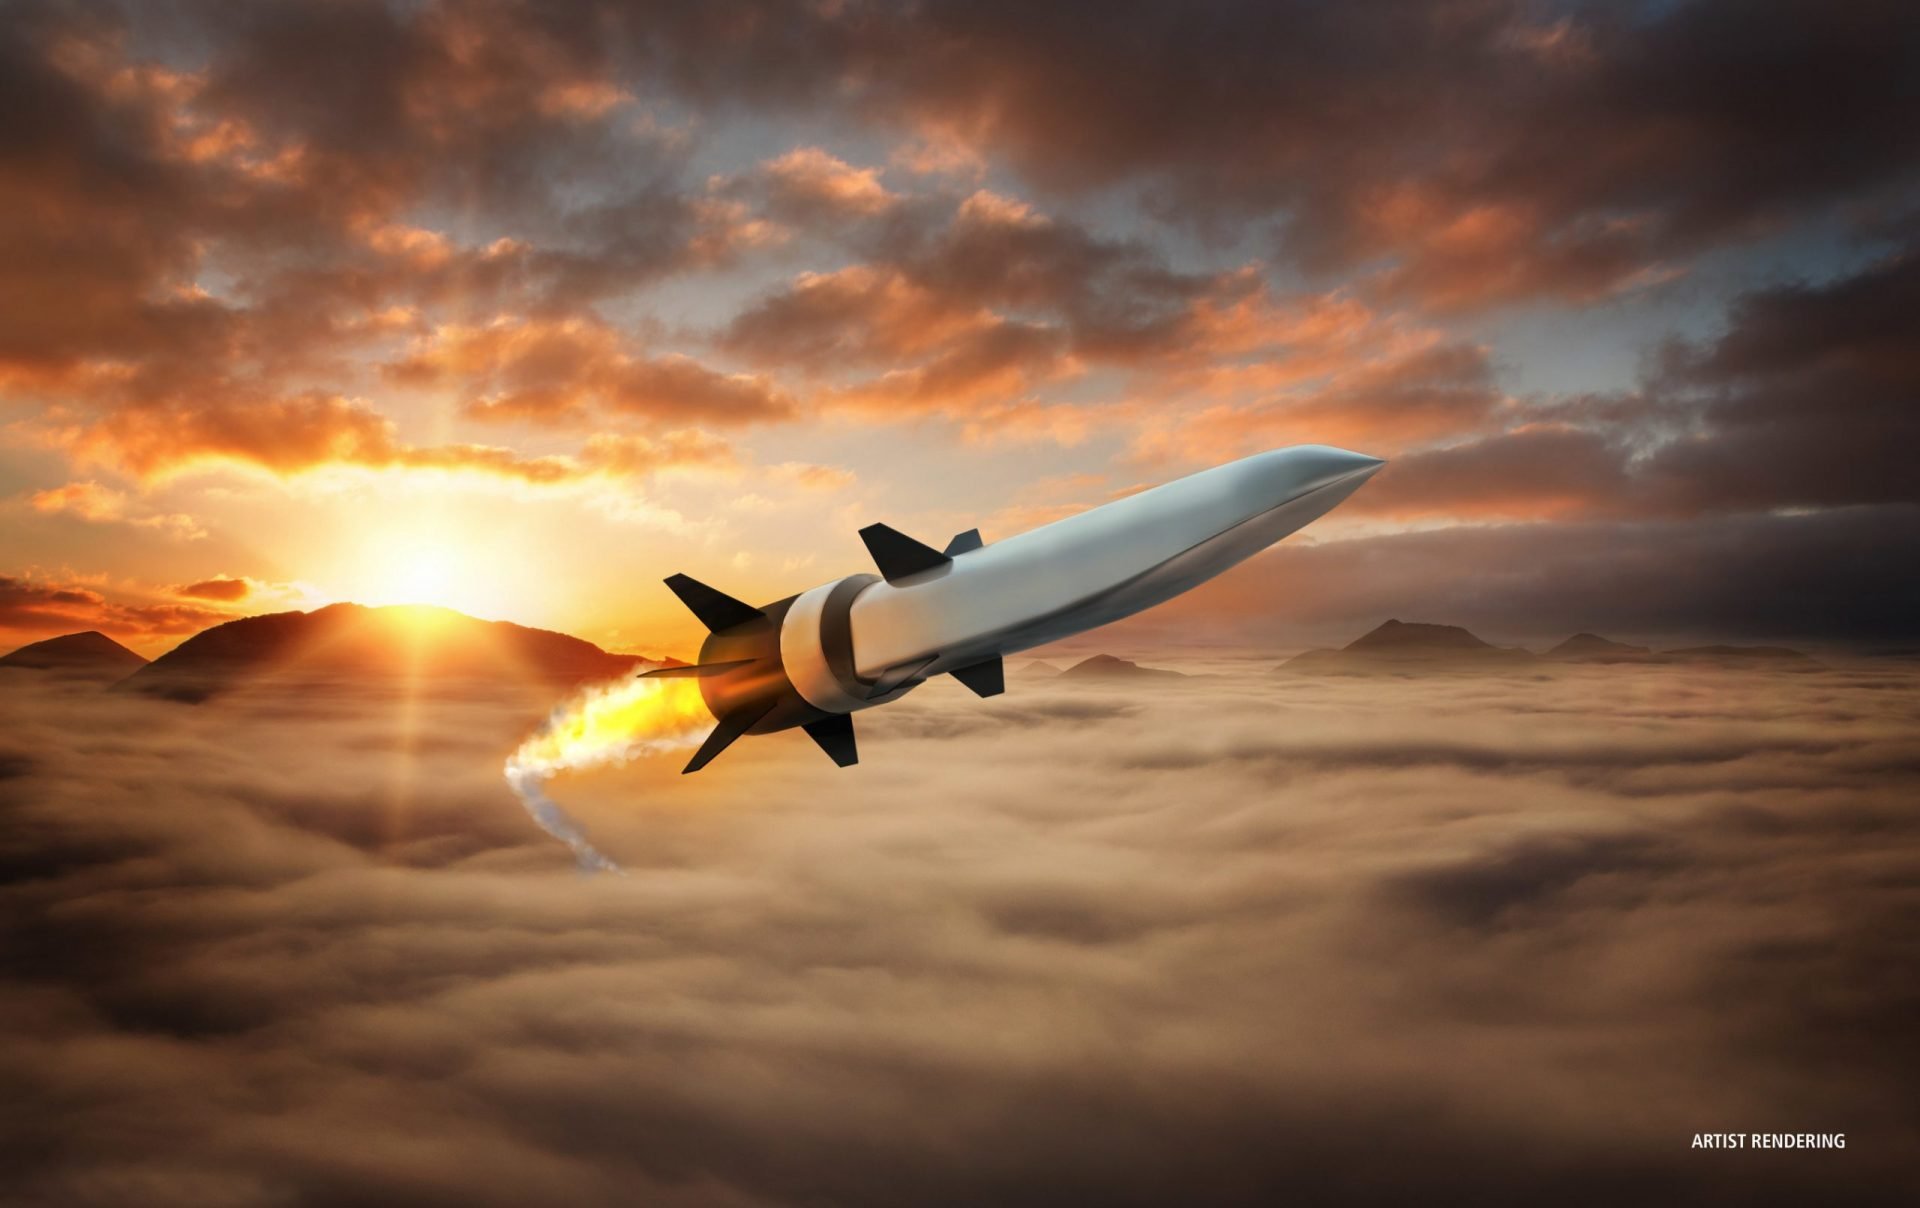 Artist’s conception of the Raytheon-Northrop Grumman scramjet-powered Hypersonic Air-breathing Weapon Concept (HAWC) that successfully completed its first flight test in September.